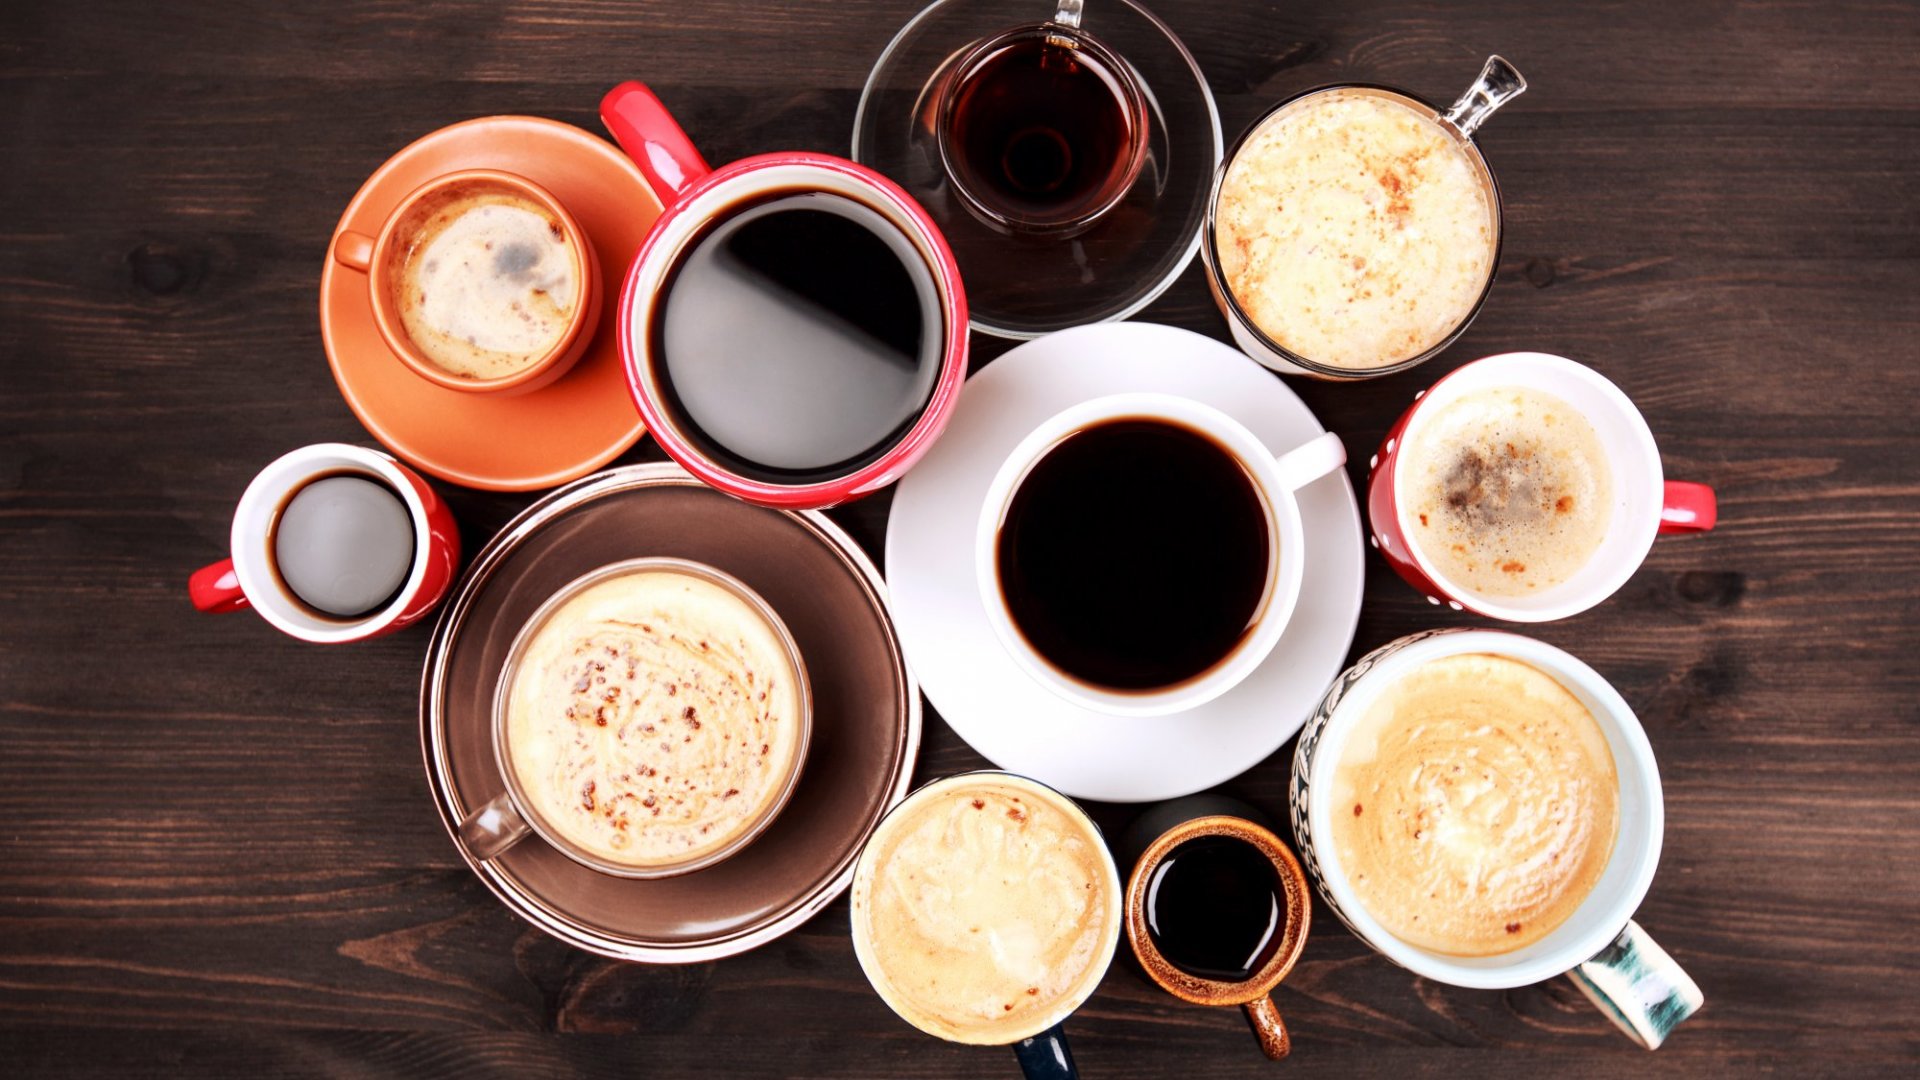 HOW HOT DRINKS COULD TRIPLE THE RISK OF OESOPHAGEAL CANCER